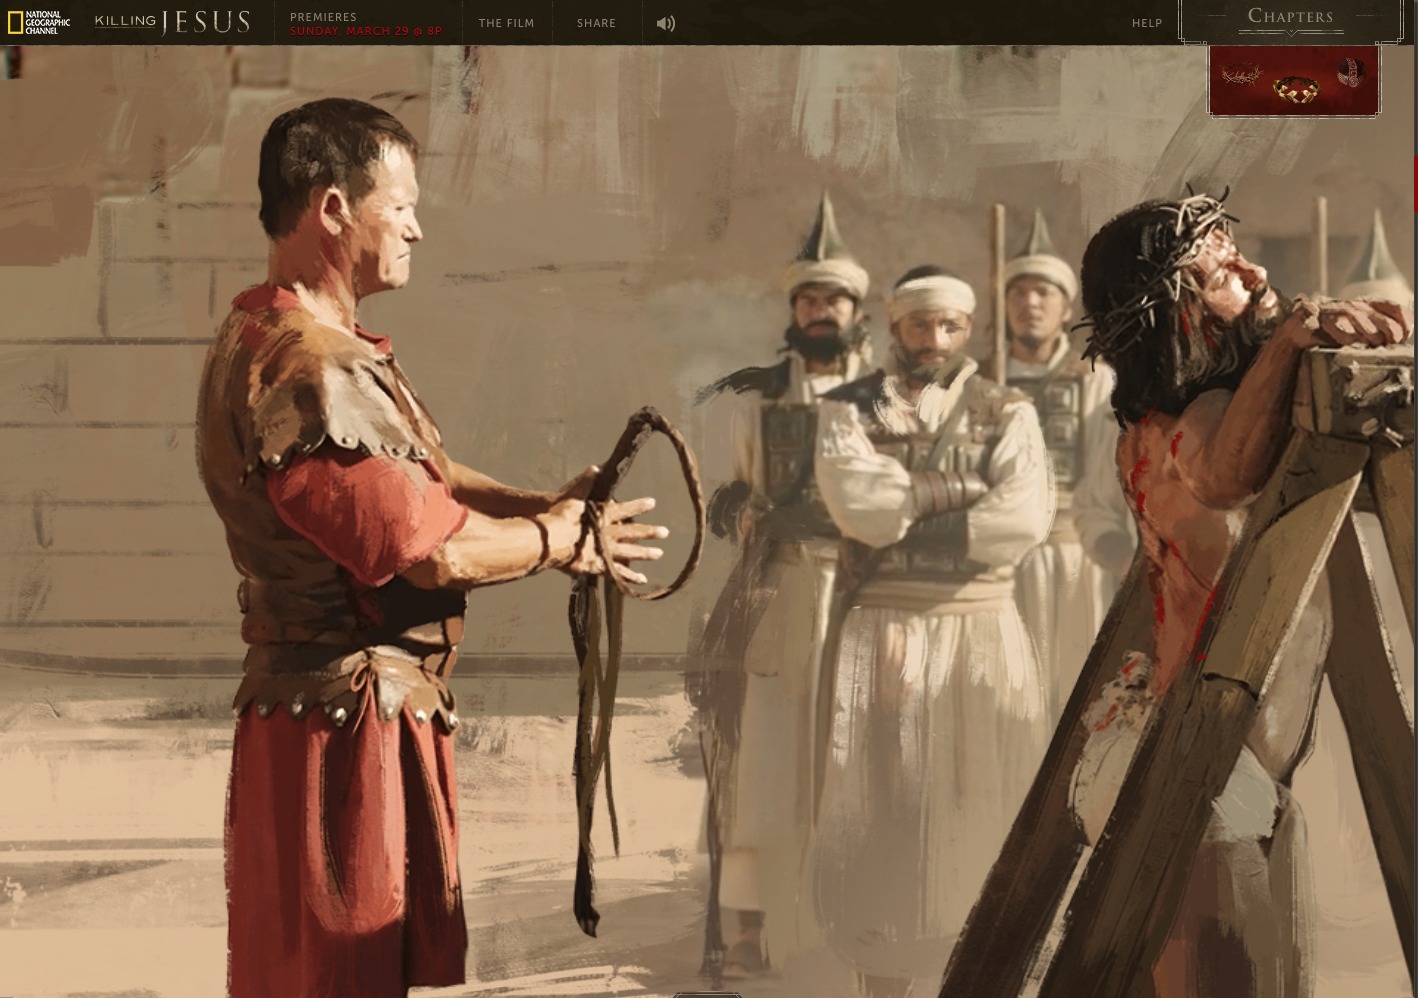 Art work from Nat Geo interactive website for 'Killing Jesus' - Malchus watched Jesus get whipped.